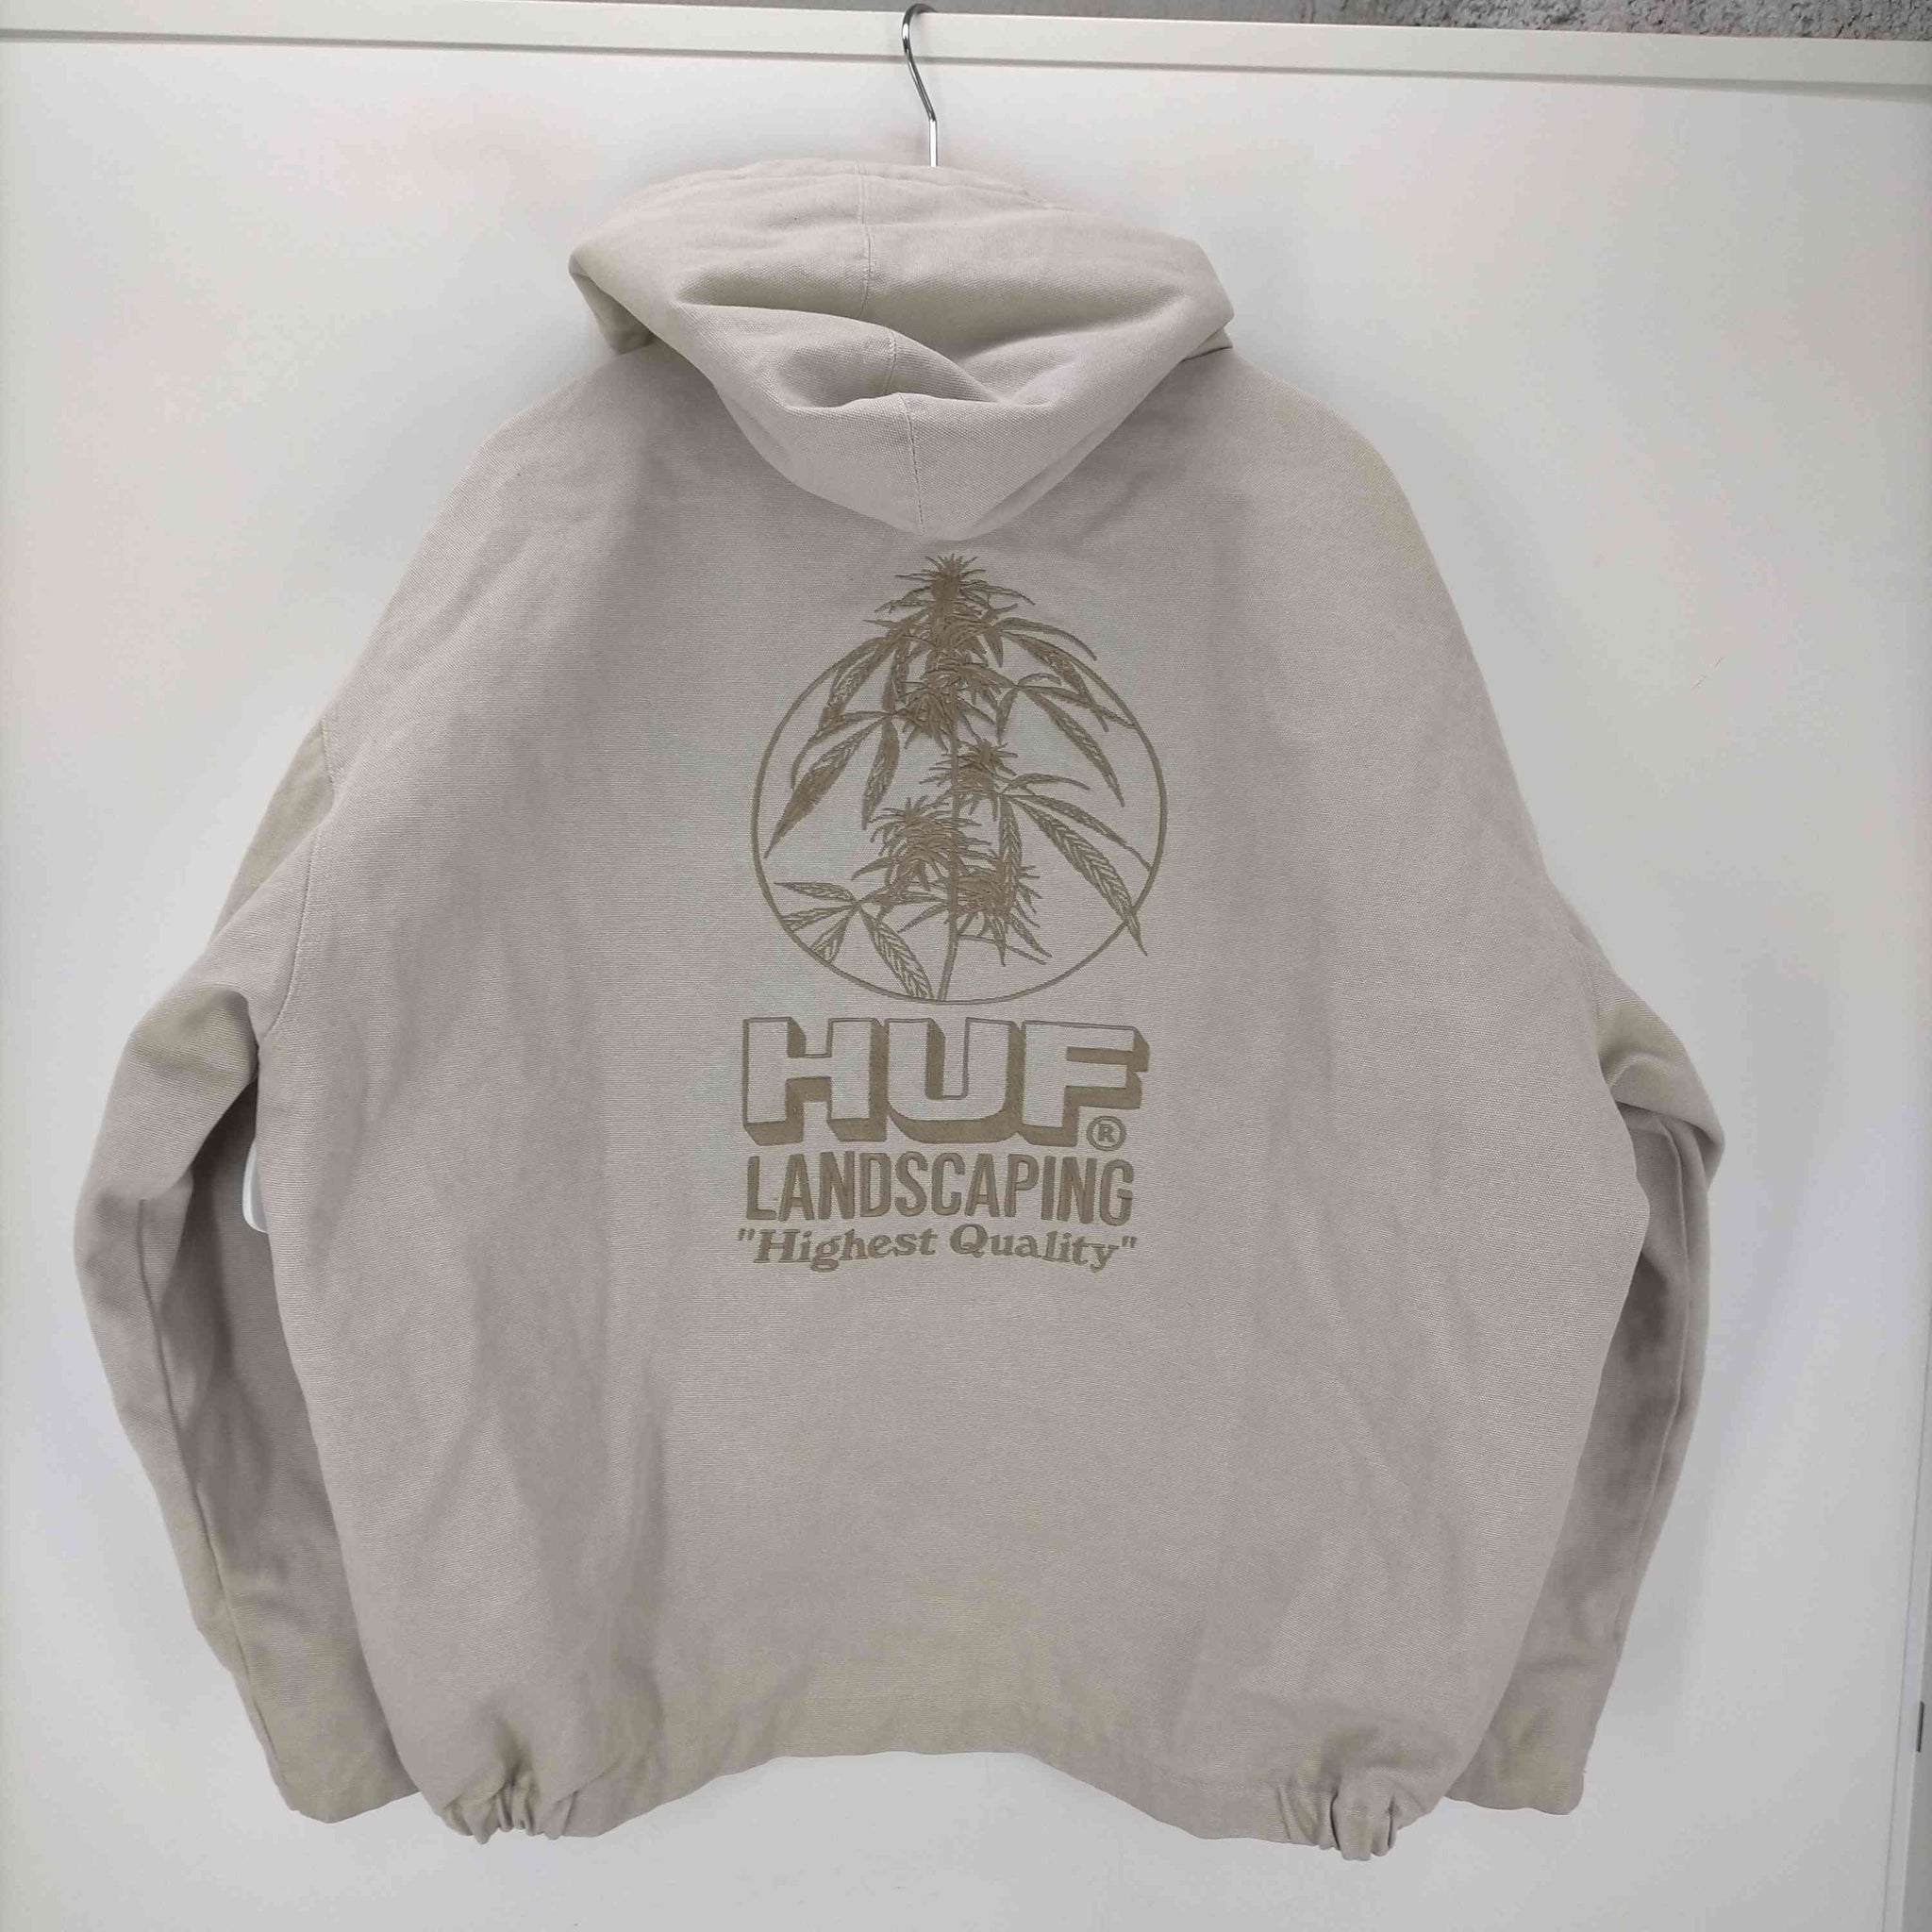 HUF(ハフ)23AW LANDSCAPING HOODED JACKET